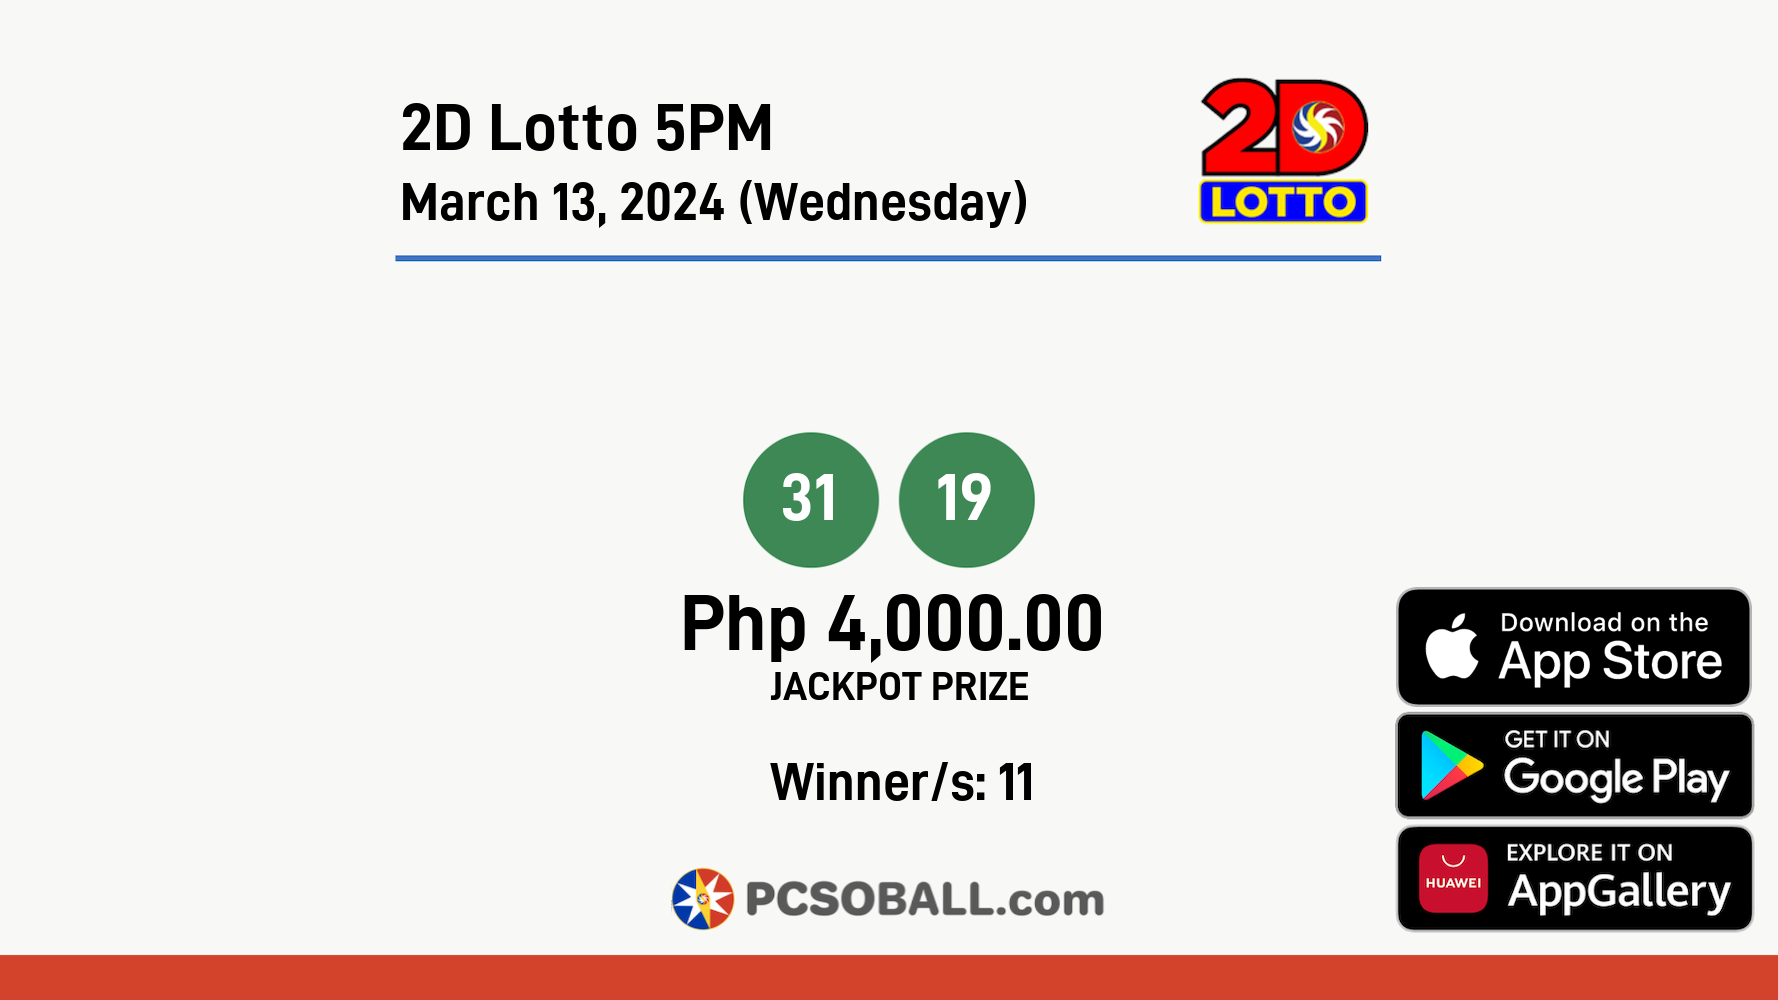 2D Lotto 5PM March 13, 2024 (Wednesday) Result